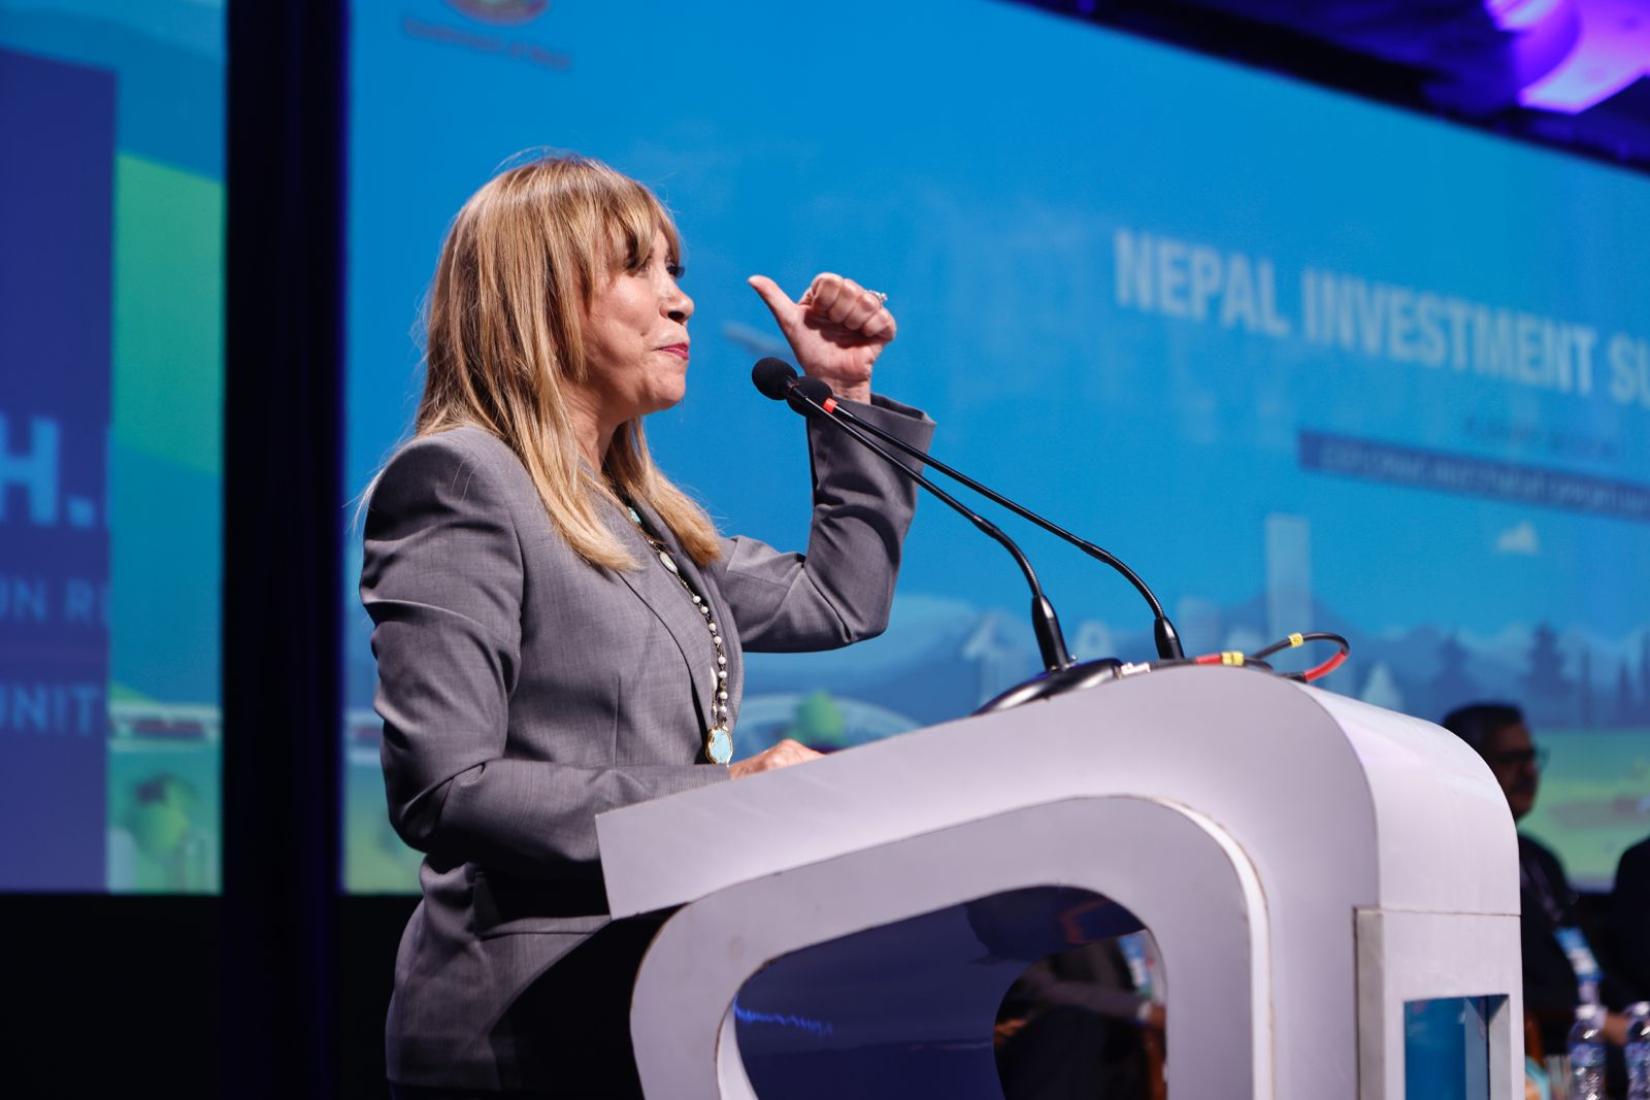 A woman speaking at the podium against a digital backdrop where the text says Nepal Investment Summit.  